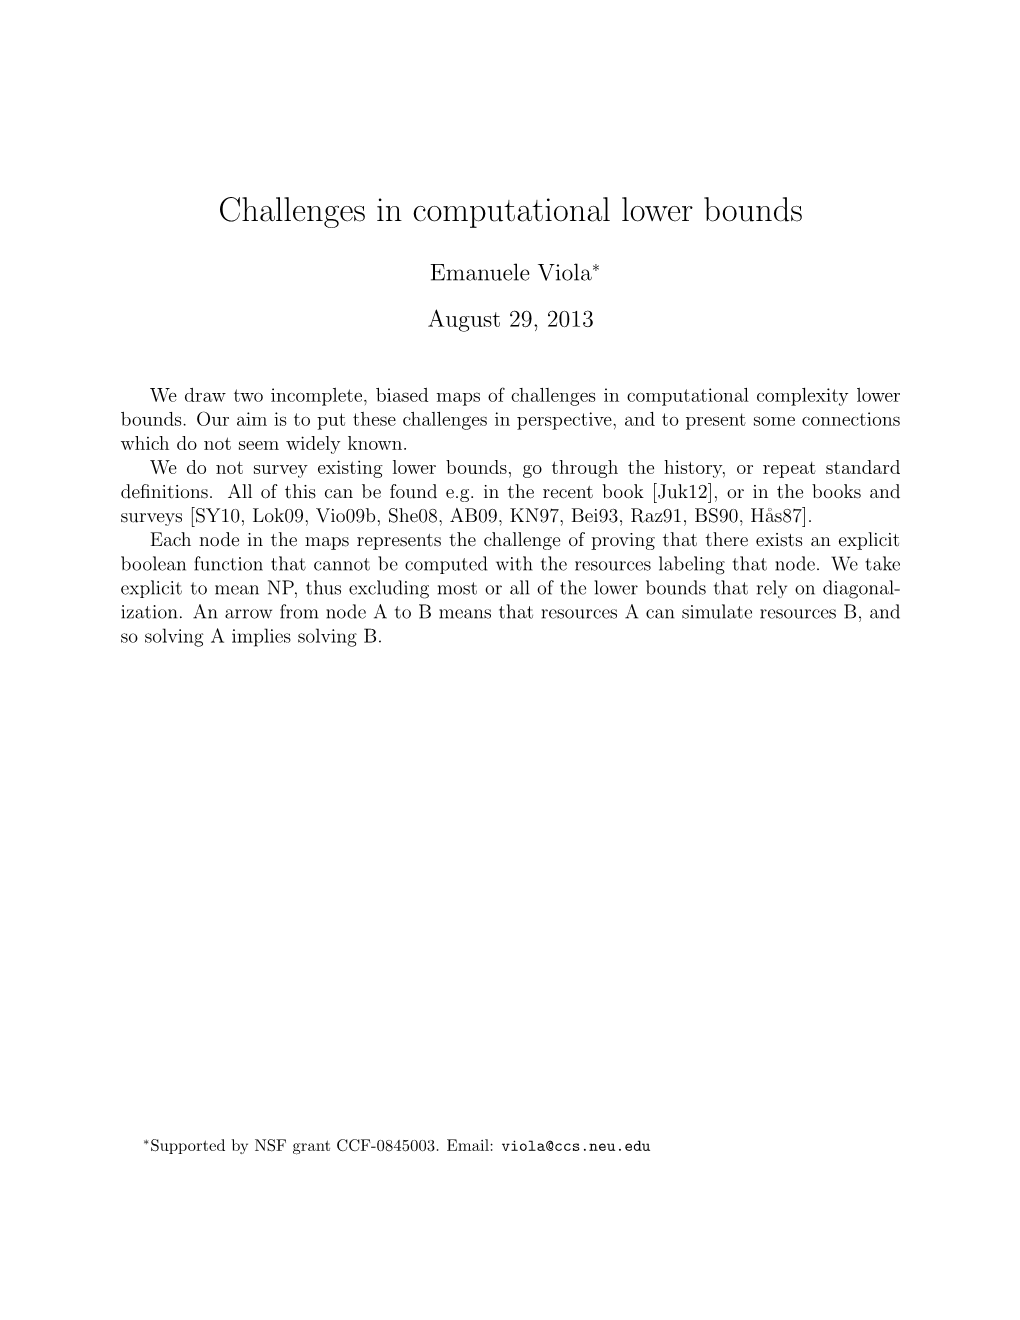 Challenges in Computational Lower Bounds